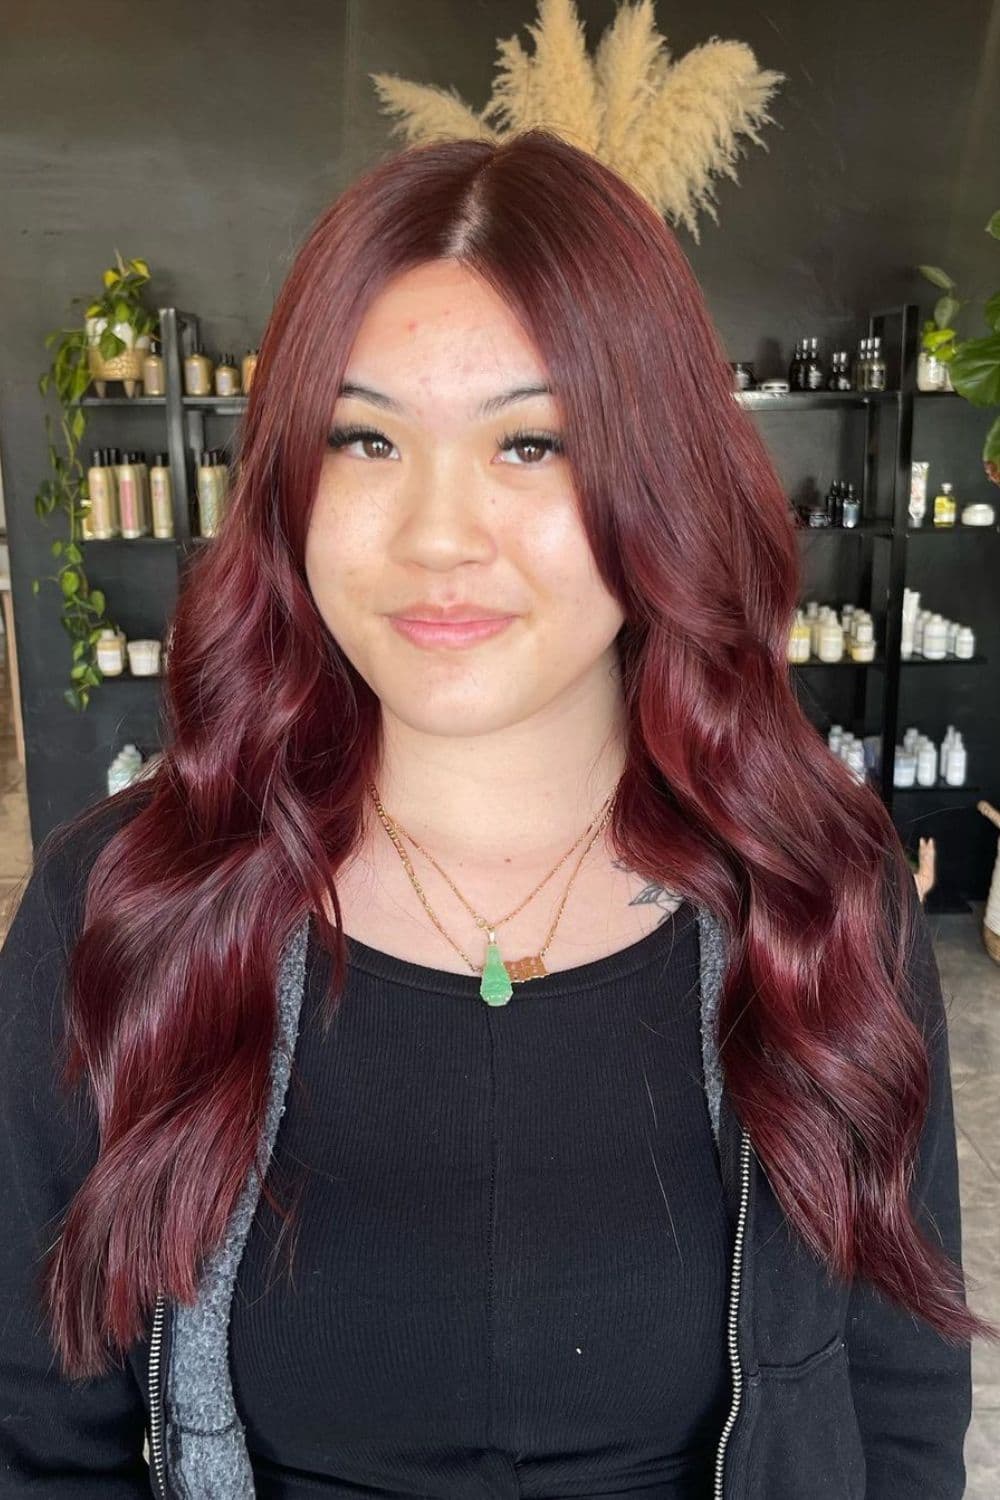 A woman with long wavy cherry cola red hair.